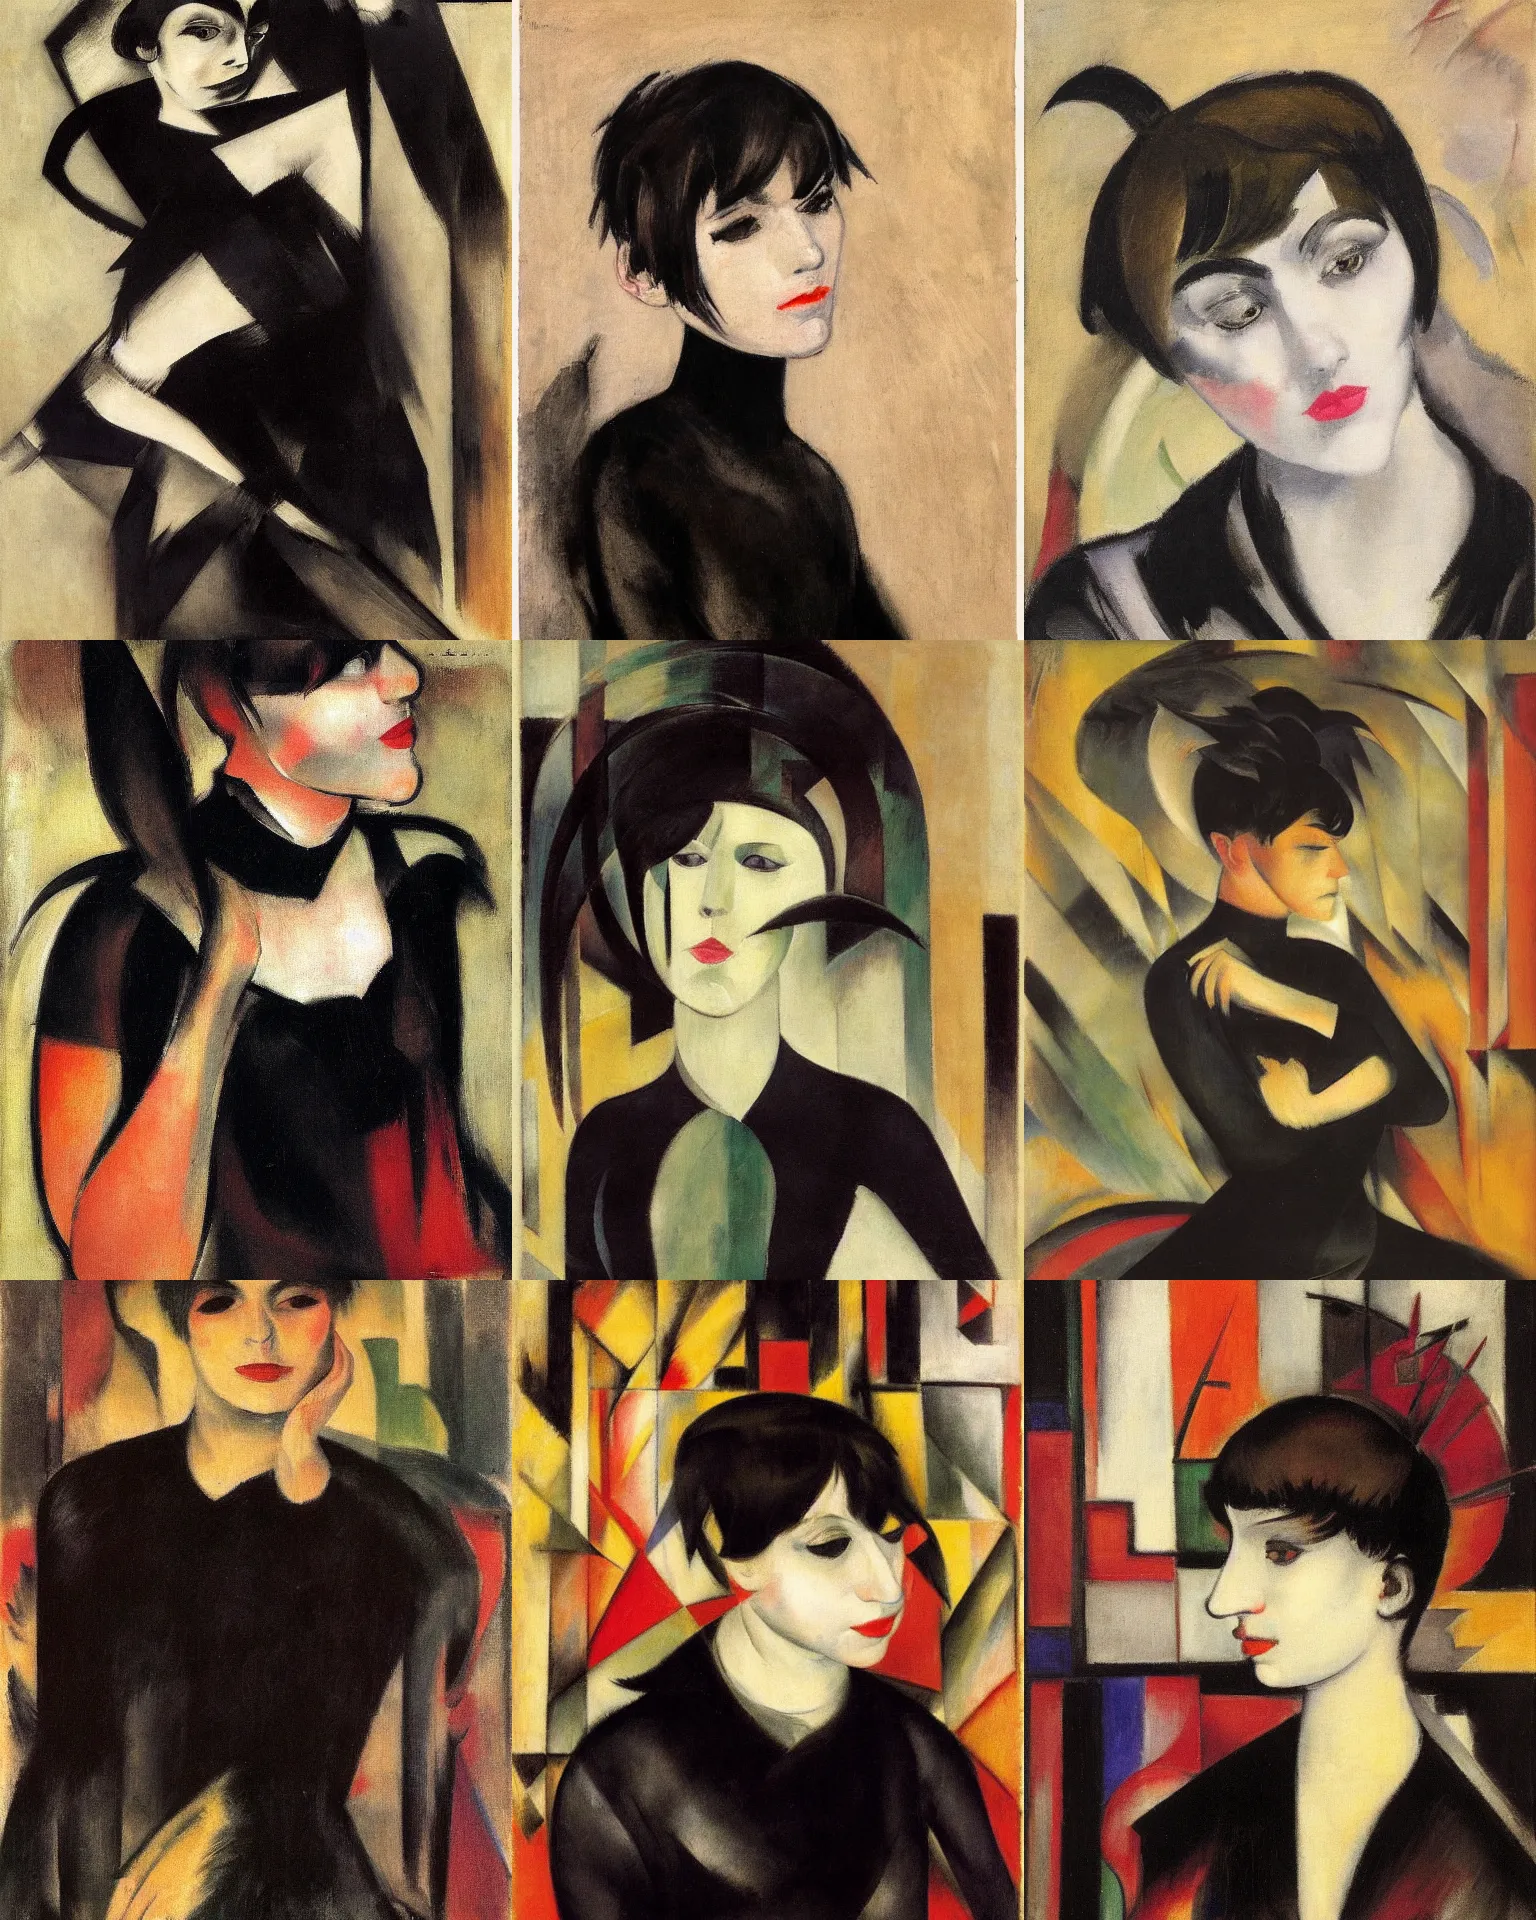 Prompt: A goth portrait by Franz Marc. Her hair is dark brown and cut into a short, messy pixie cut. She has a slightly rounded face, with a pointed chin, large entirely-black eyes, and a small nose. She is wearing a black tank top, a black leather jacket, a black knee-length skirt, a black choker, and black leather boots.